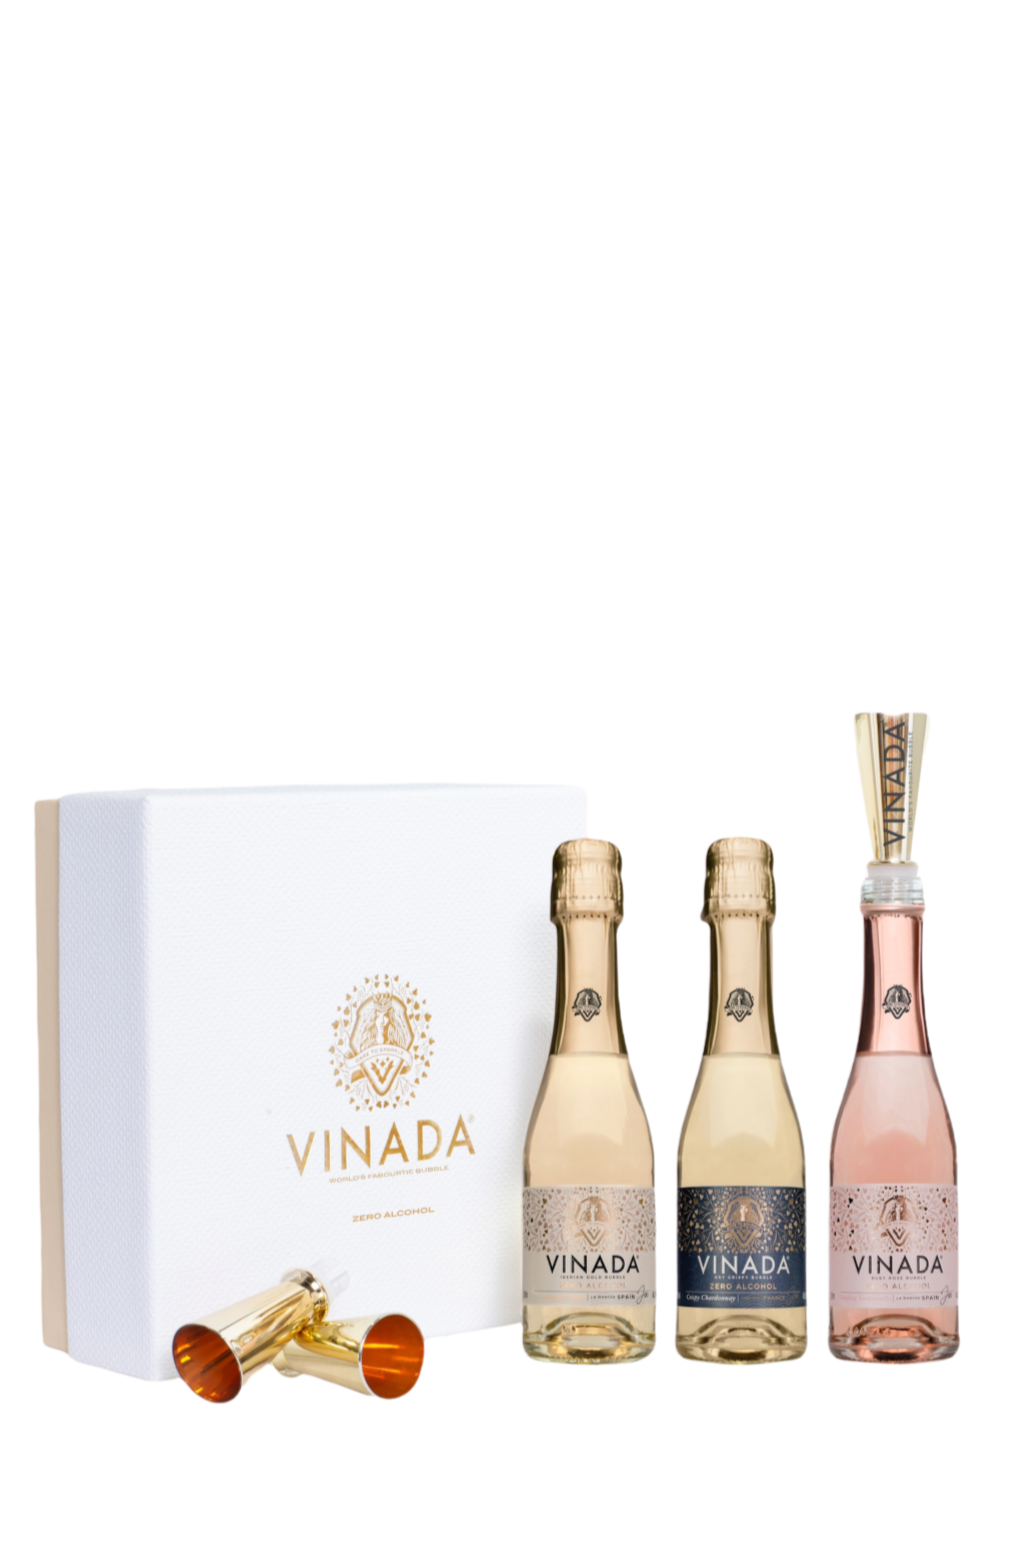 VINADA® - FULL EXPERIENCE GIFT BOX - 200ML Bottles (3) + 3 Sippers